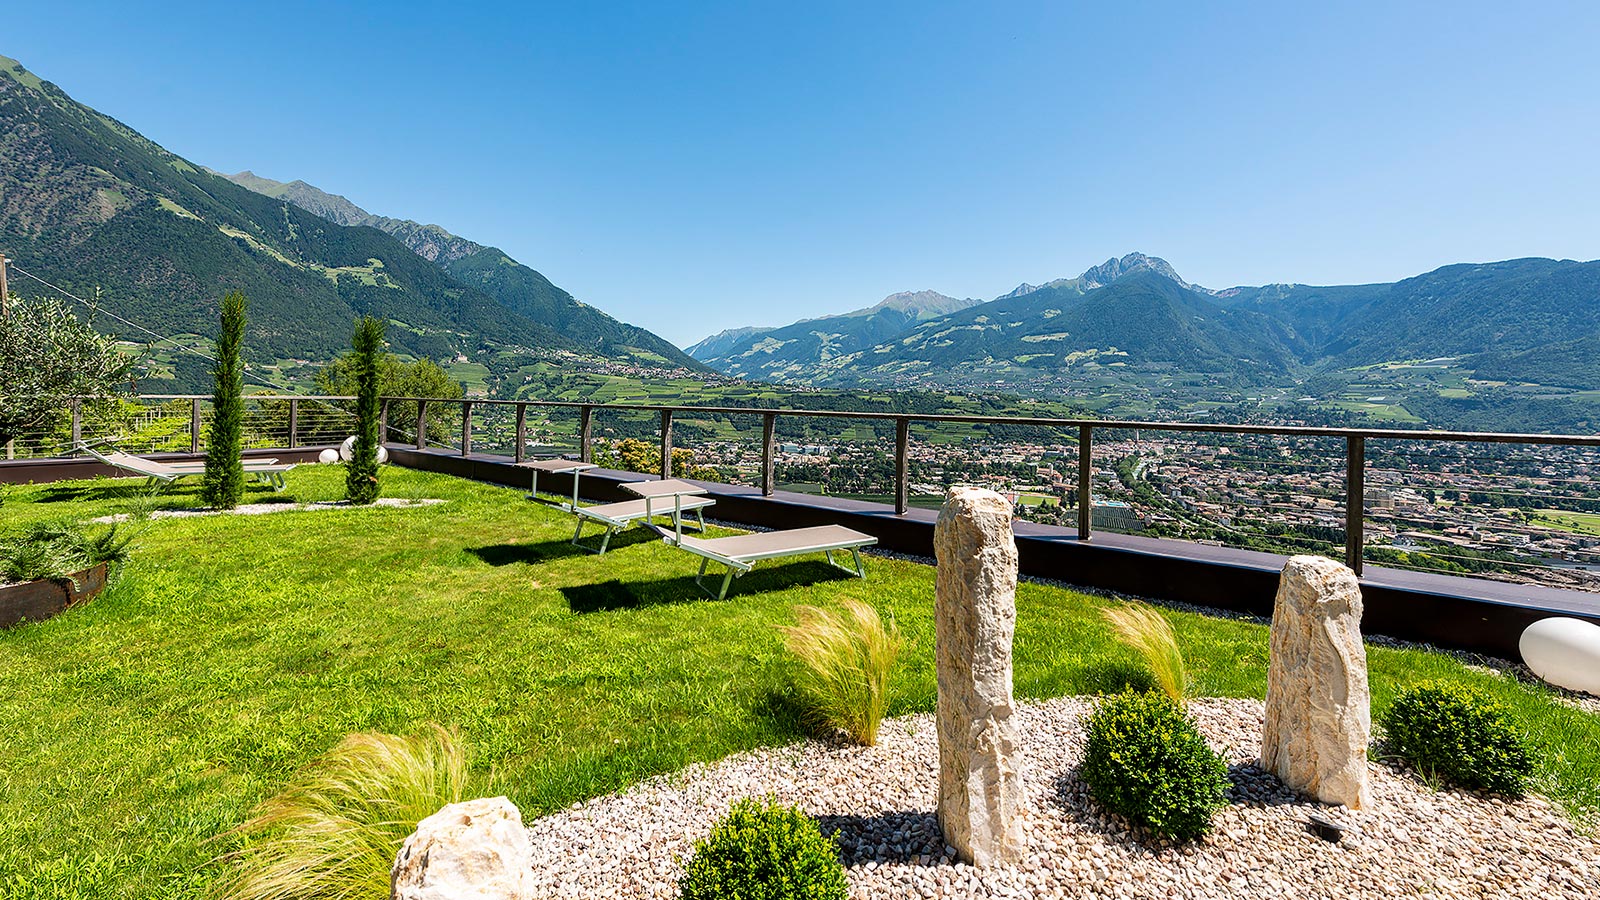 View of the city of Merano from the Residence Aqualis